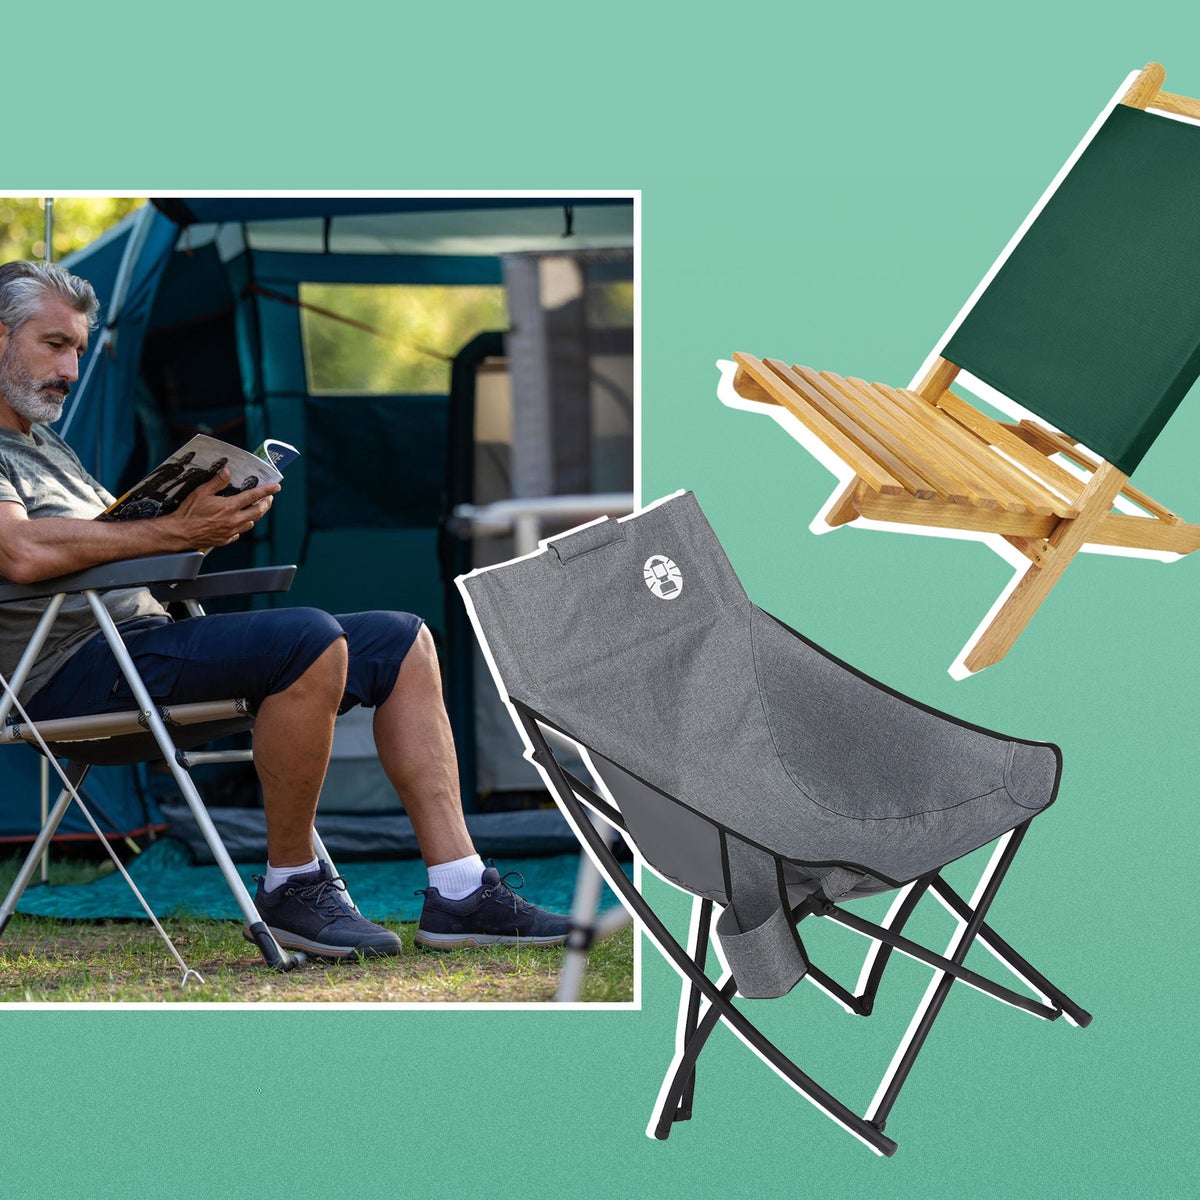 https://static.independent.co.uk/2023/04/19/12/best%20camping%20chairs2%20copy-2.jpg?width=1200&height=1200&fit=crop